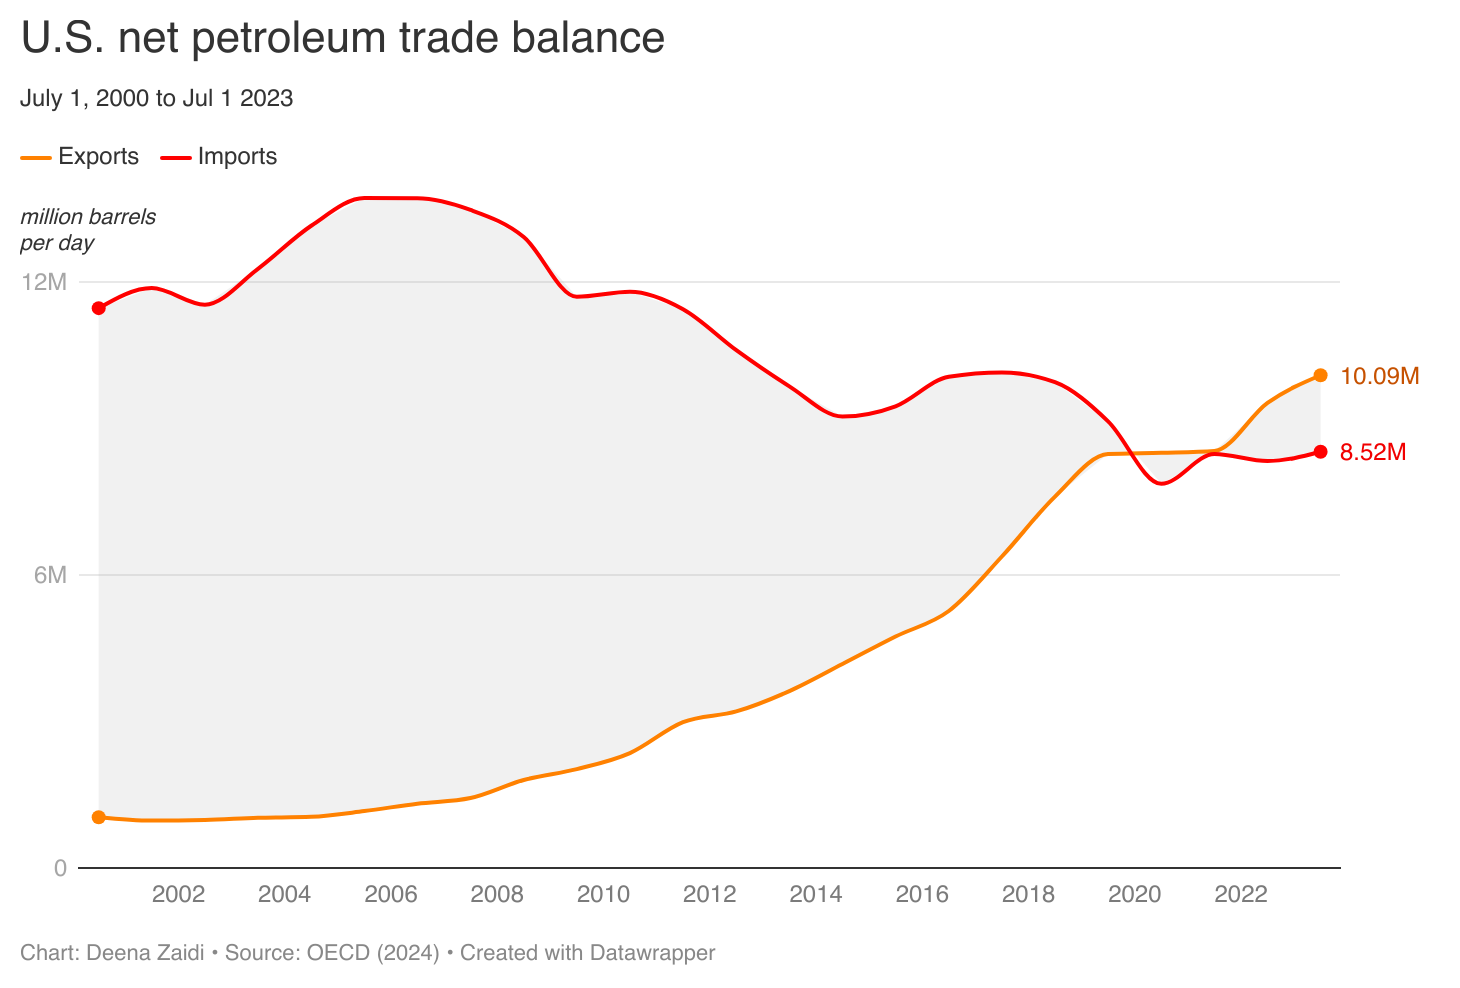 The line chart shows net trade balance of petroleum in the U.S.